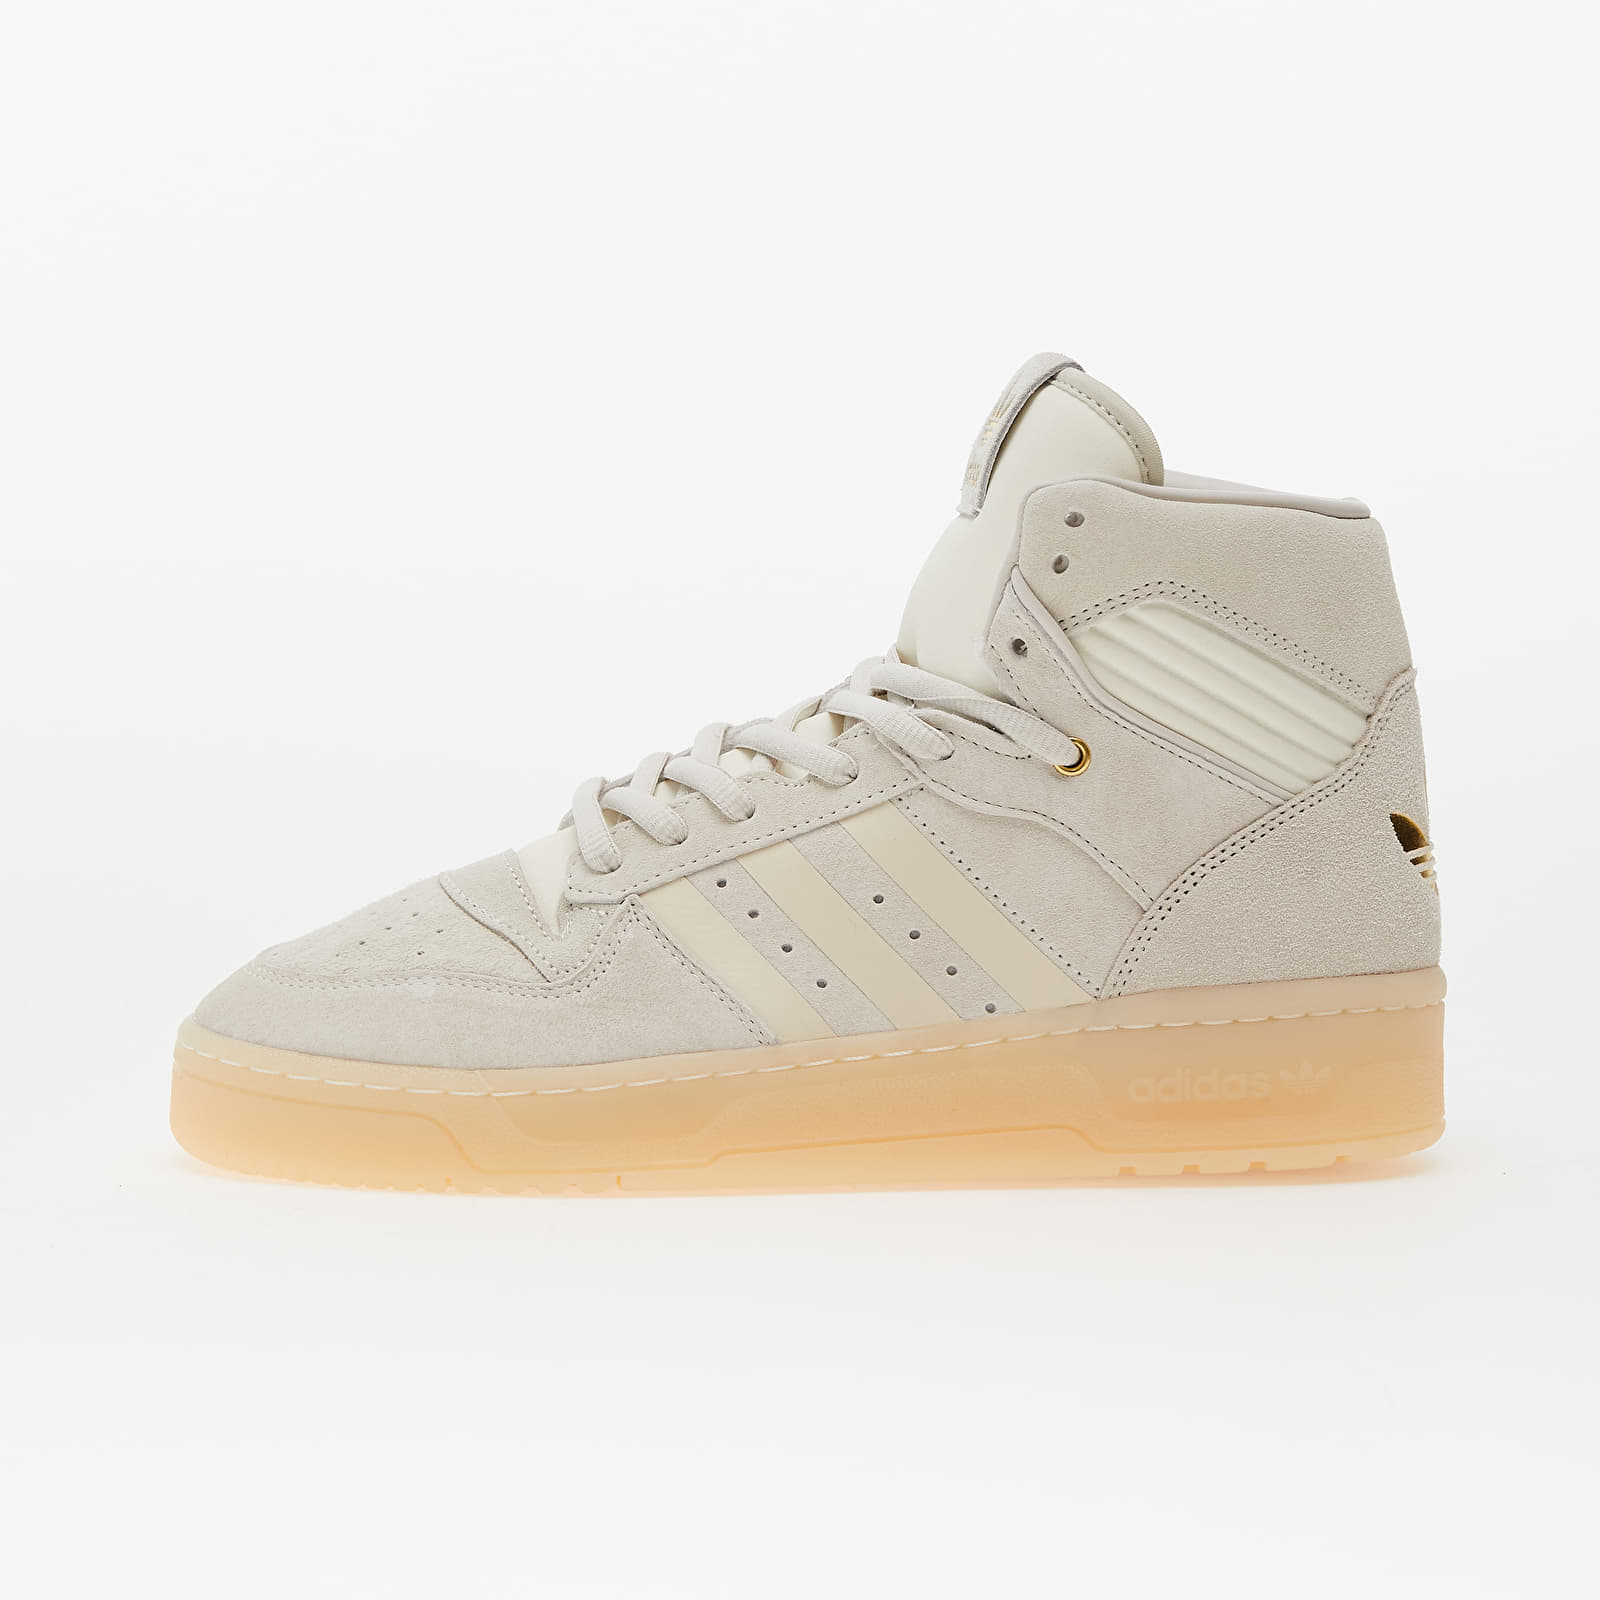 Men's sneakers and shoes adidas Originals Rivalry Hi Off White/ Core White/ EASYEL